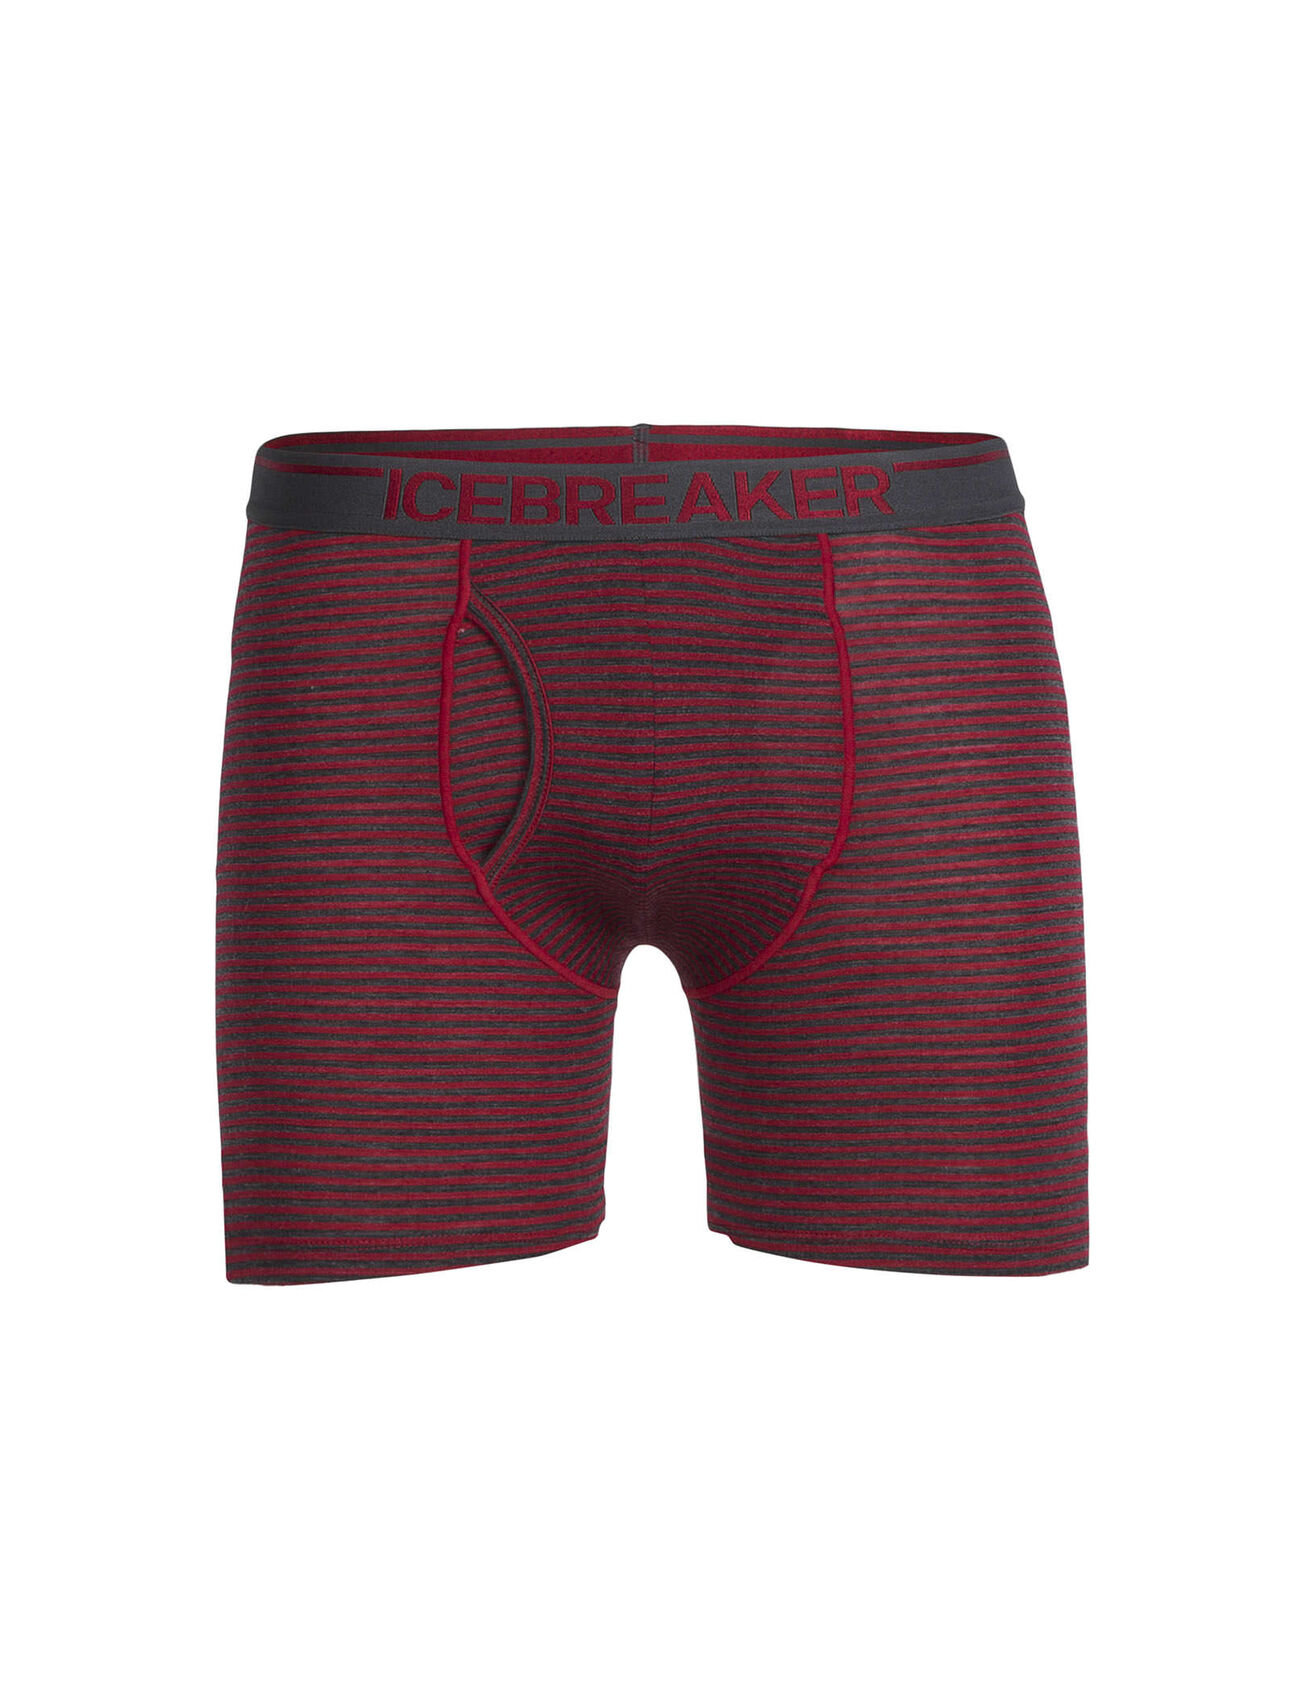 Anatomica Relaxed Boxers w Fly